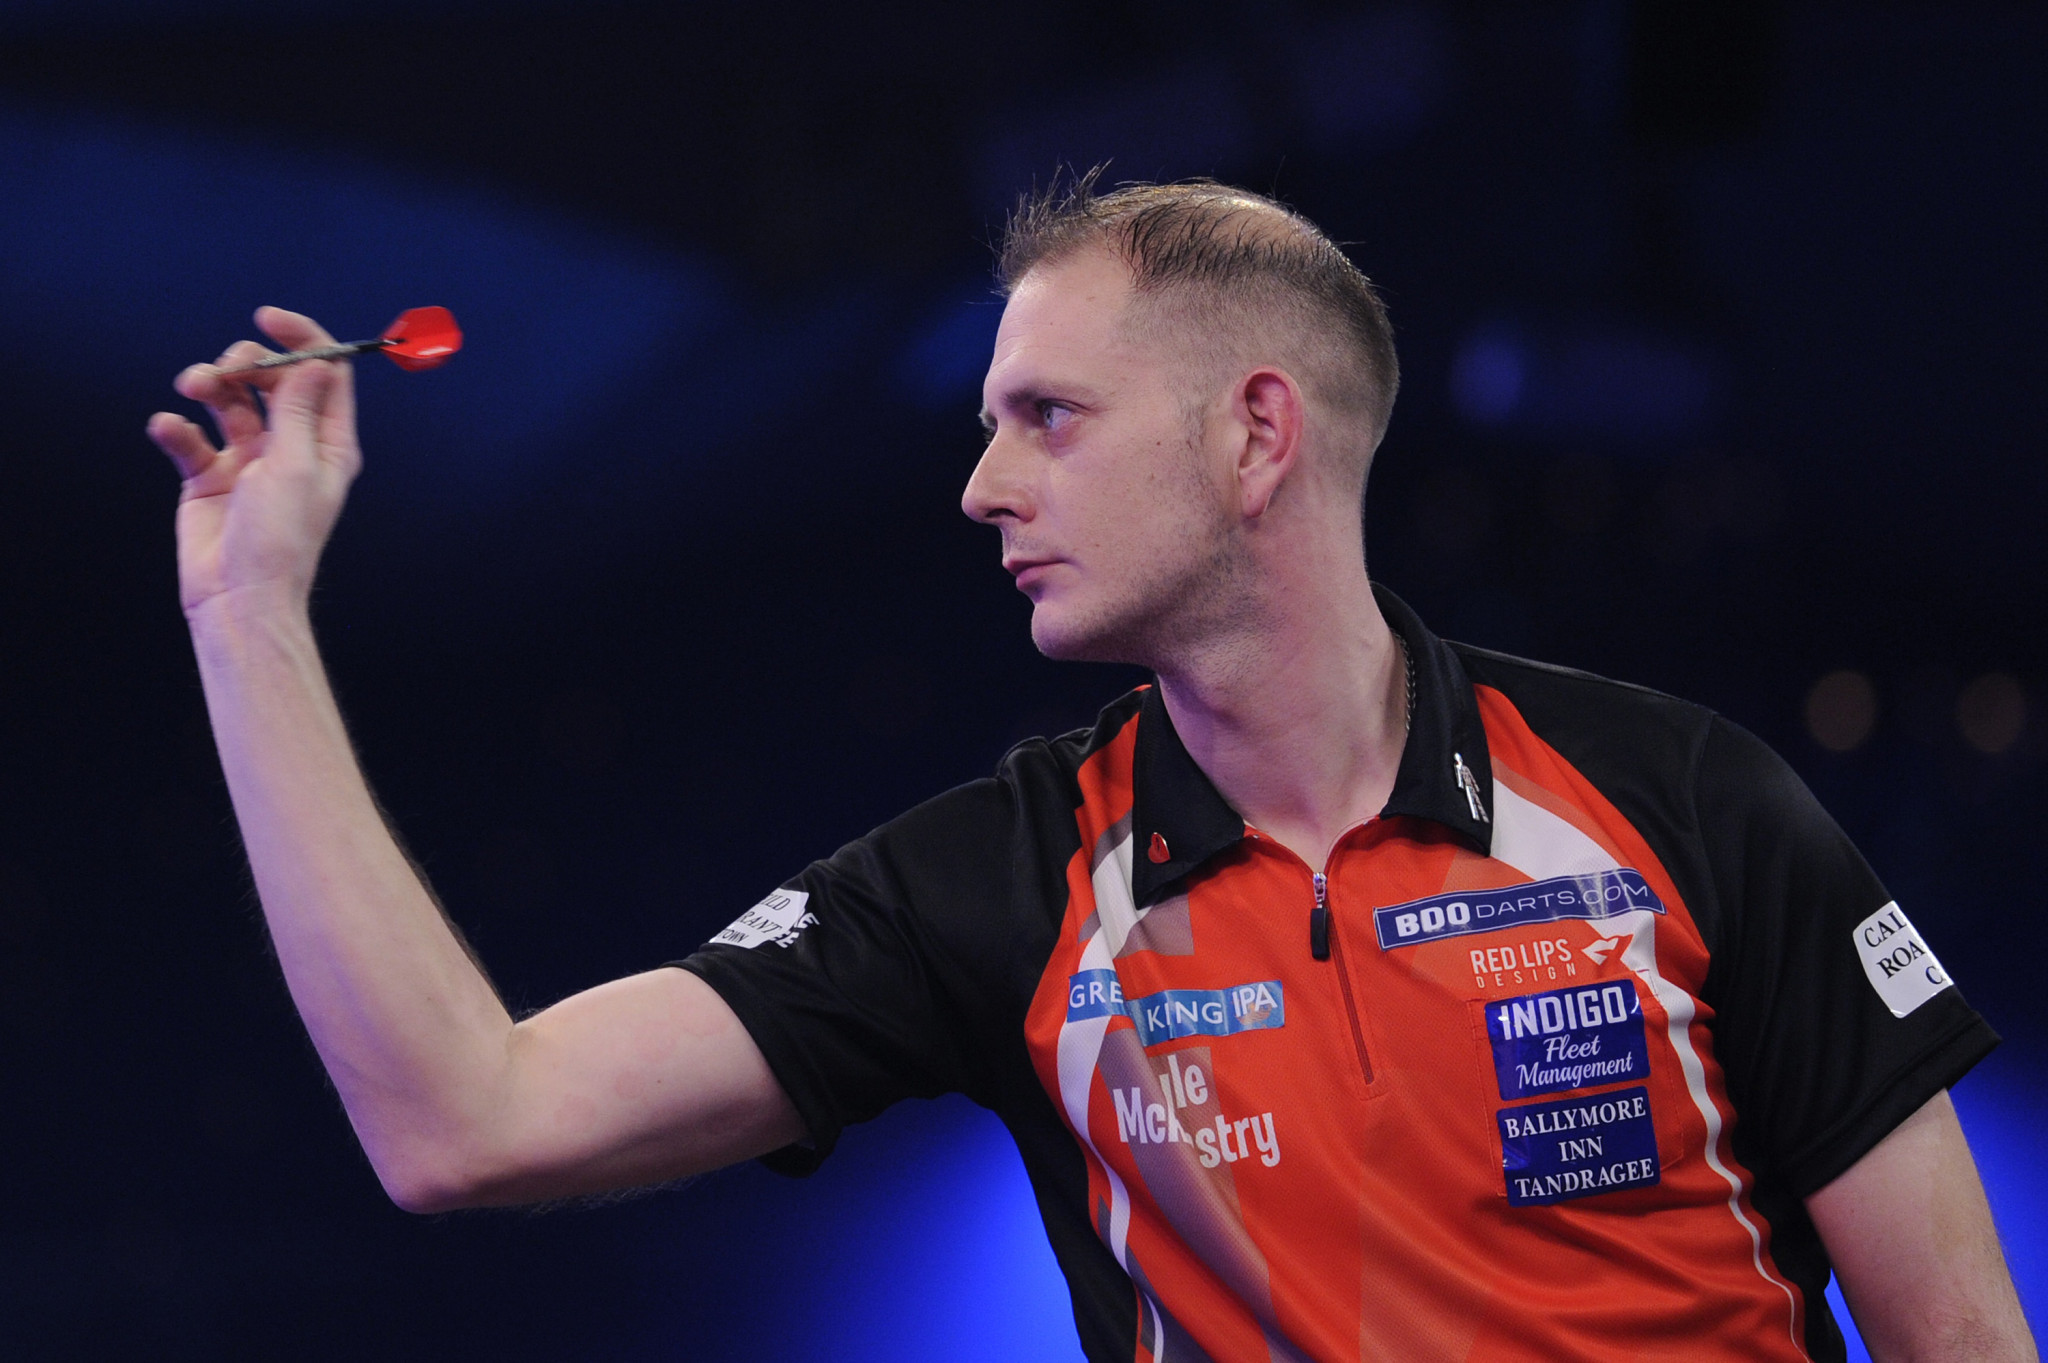 Kyle McKinstry has been given an eight-year ban from darts for match-fixing ©Getty Images